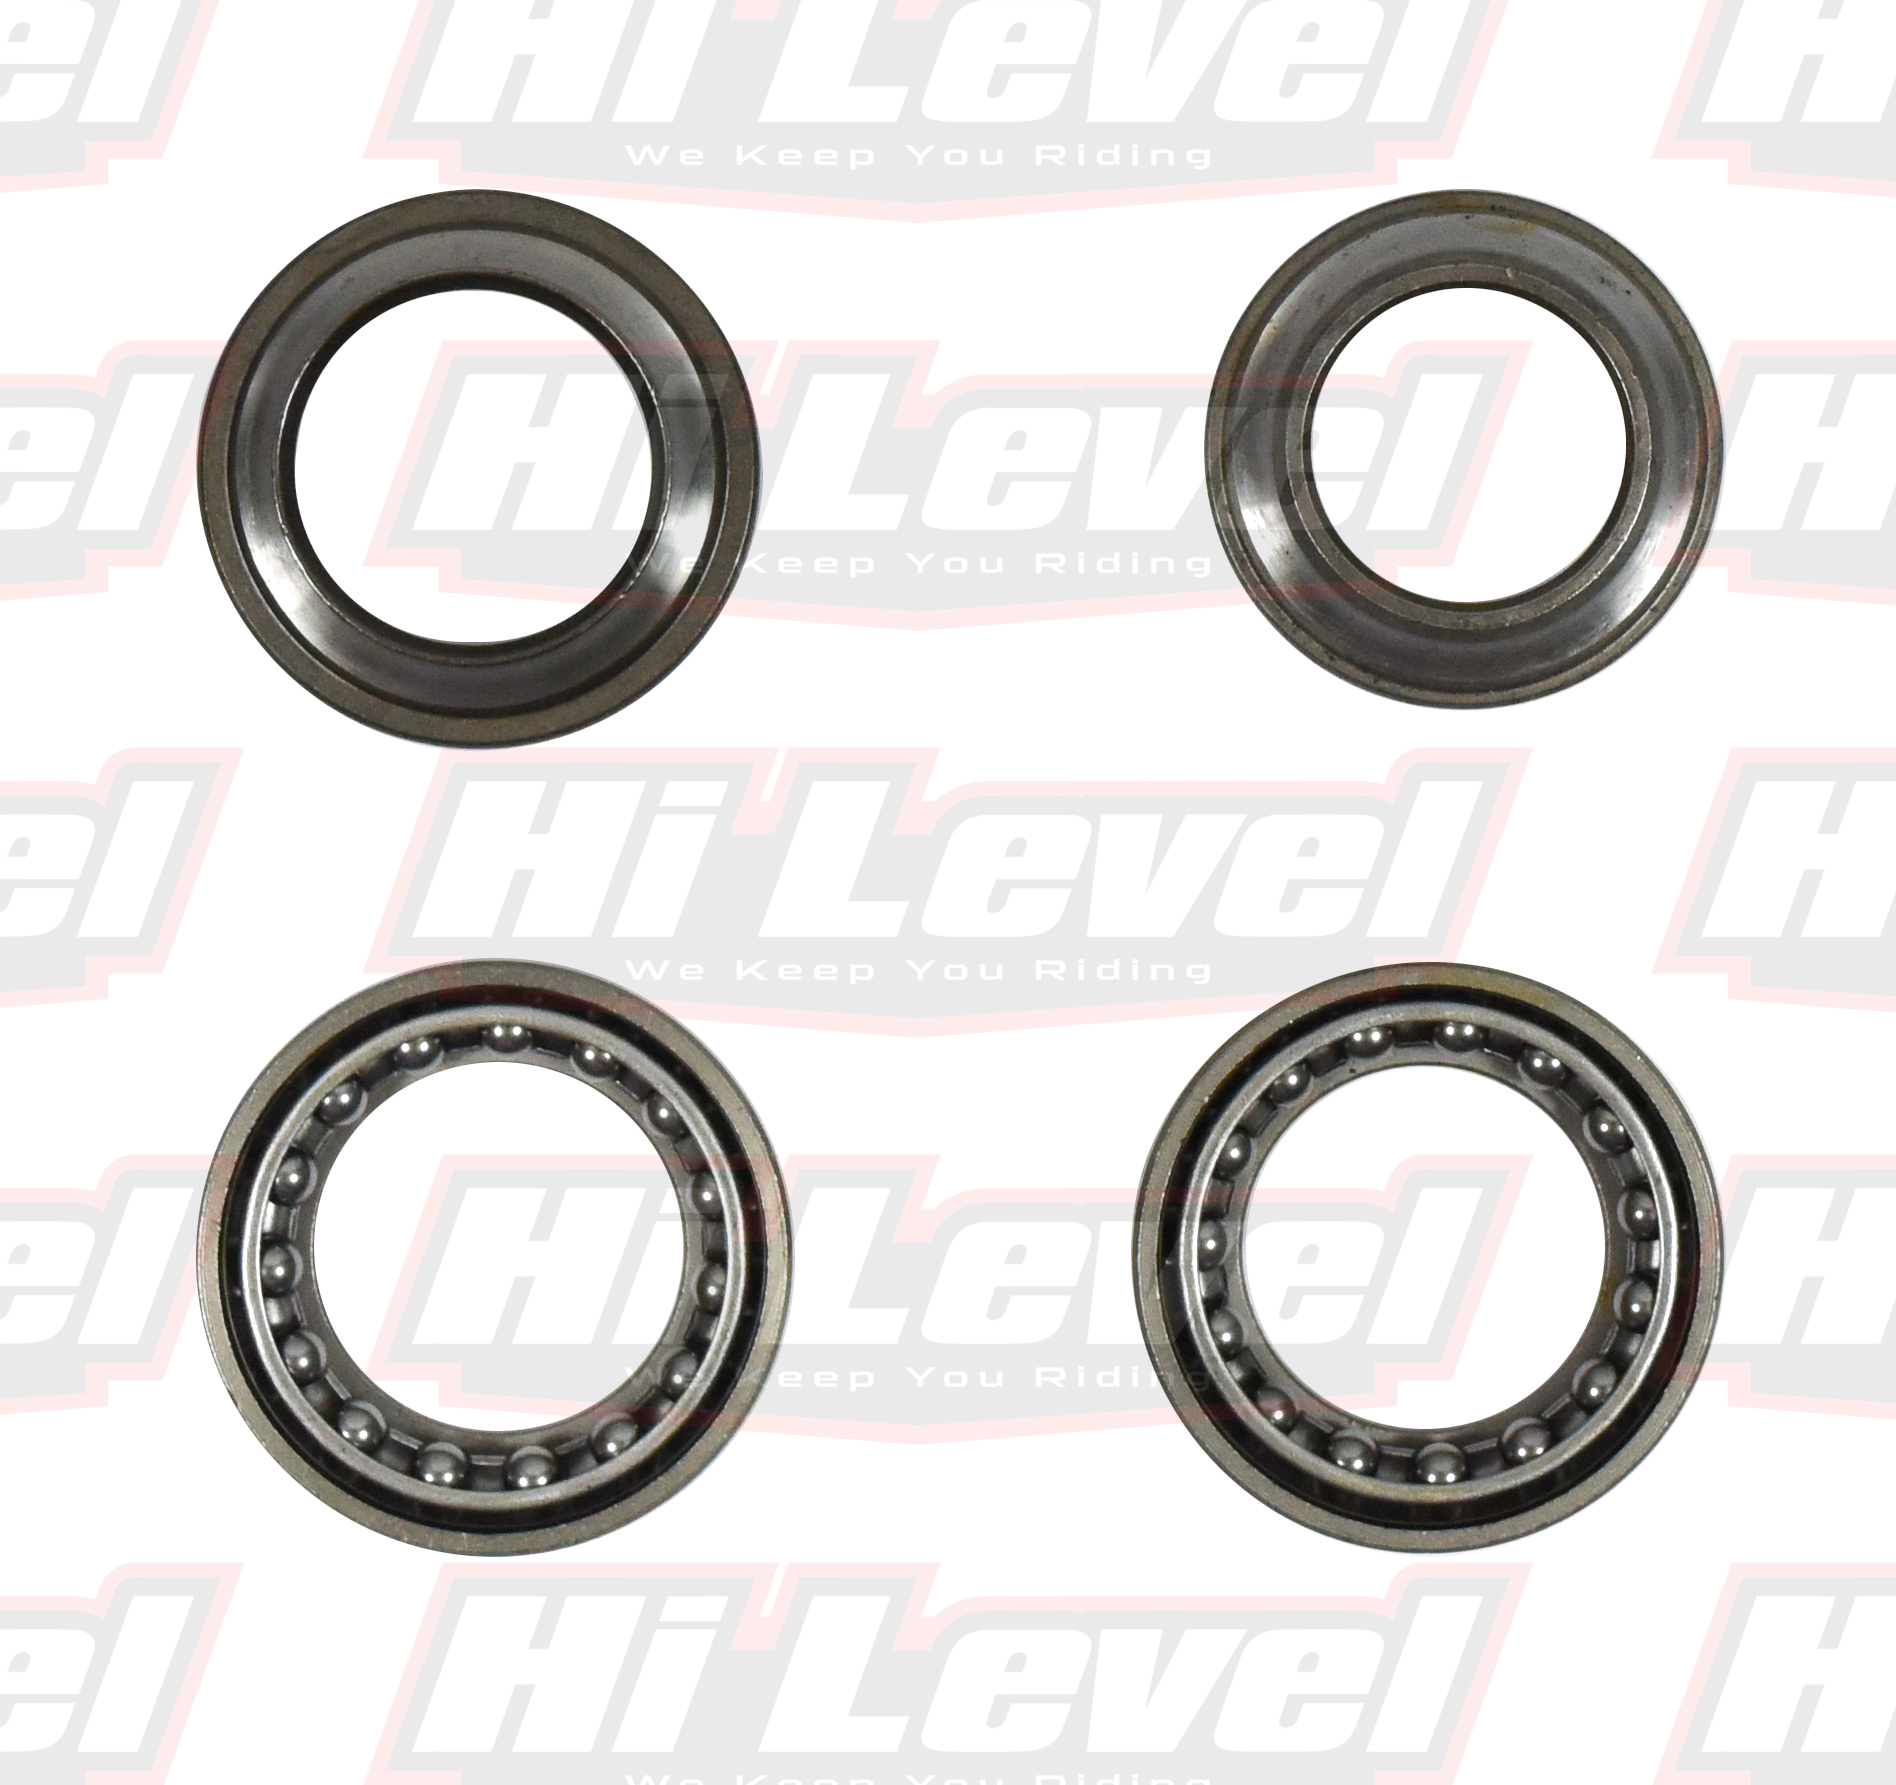 SSS095 AS FITTED TO A100, FR50, FR70, FR80 TAPER CUP & CONE SET